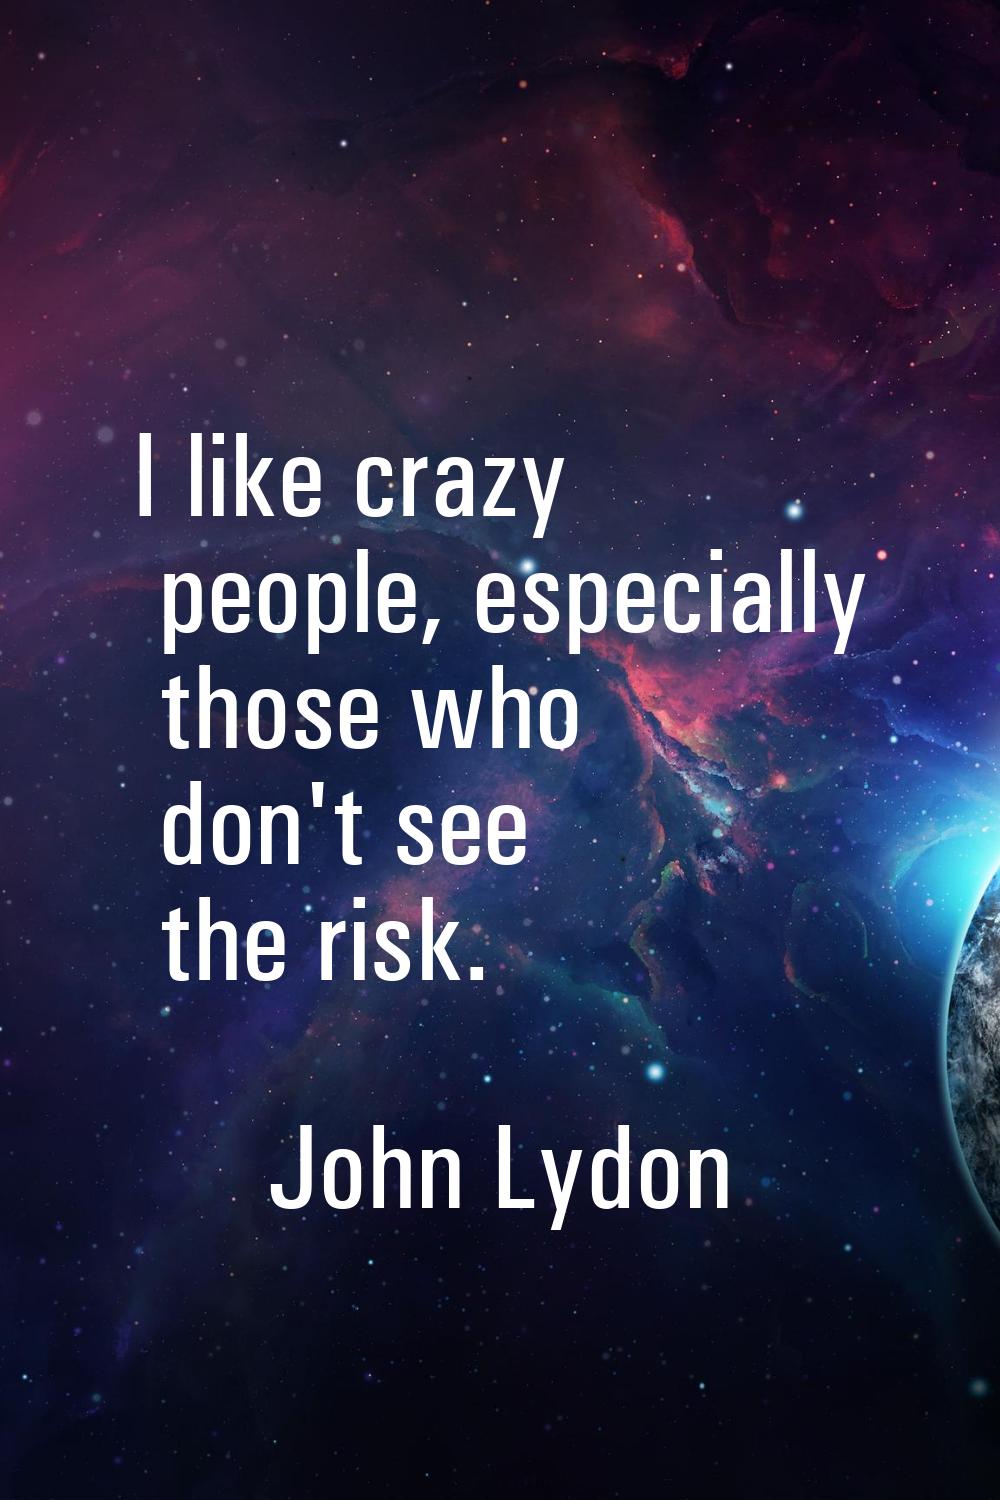 I like crazy people, especially those who don't see the risk.